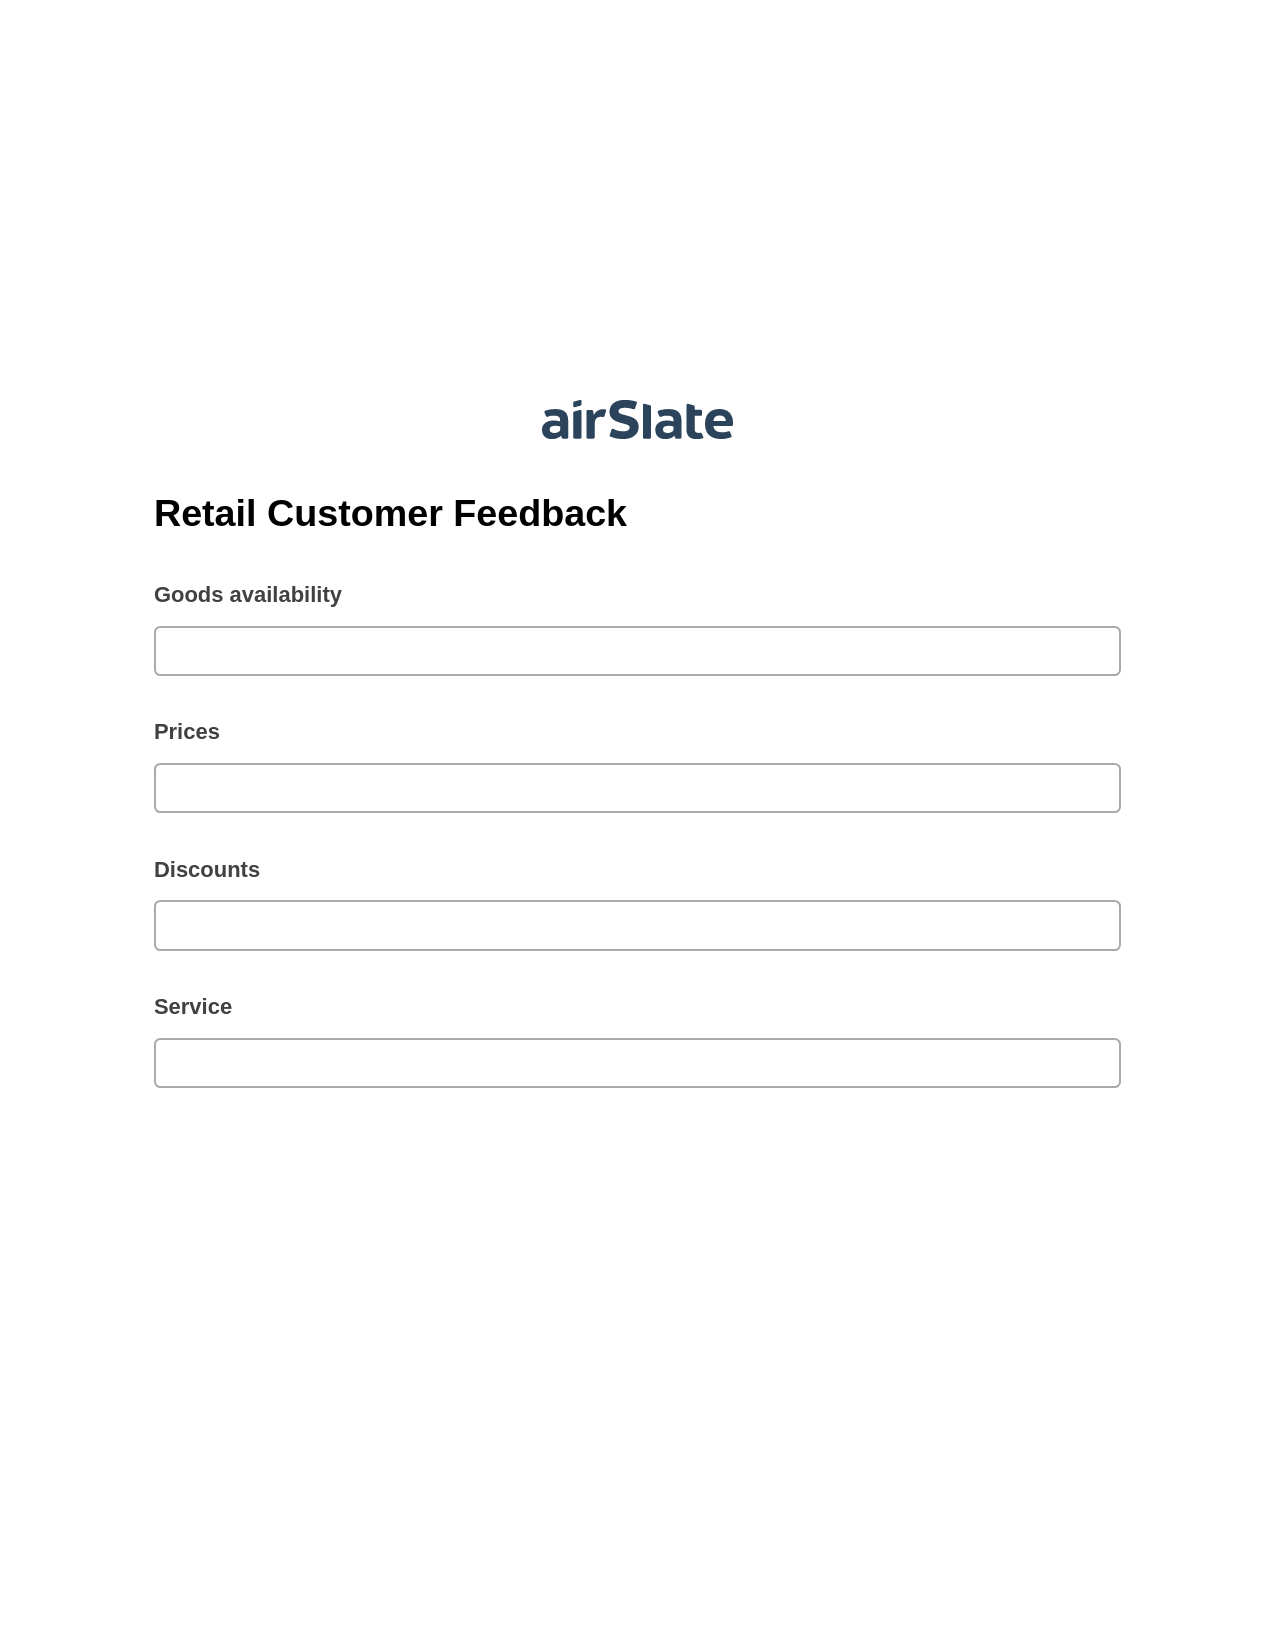 Retail Customer Feedback Pre-fill from NetSuite Records Bot, Google Sheet Two-Way Binding Bot, Export to NetSuite Record Bot